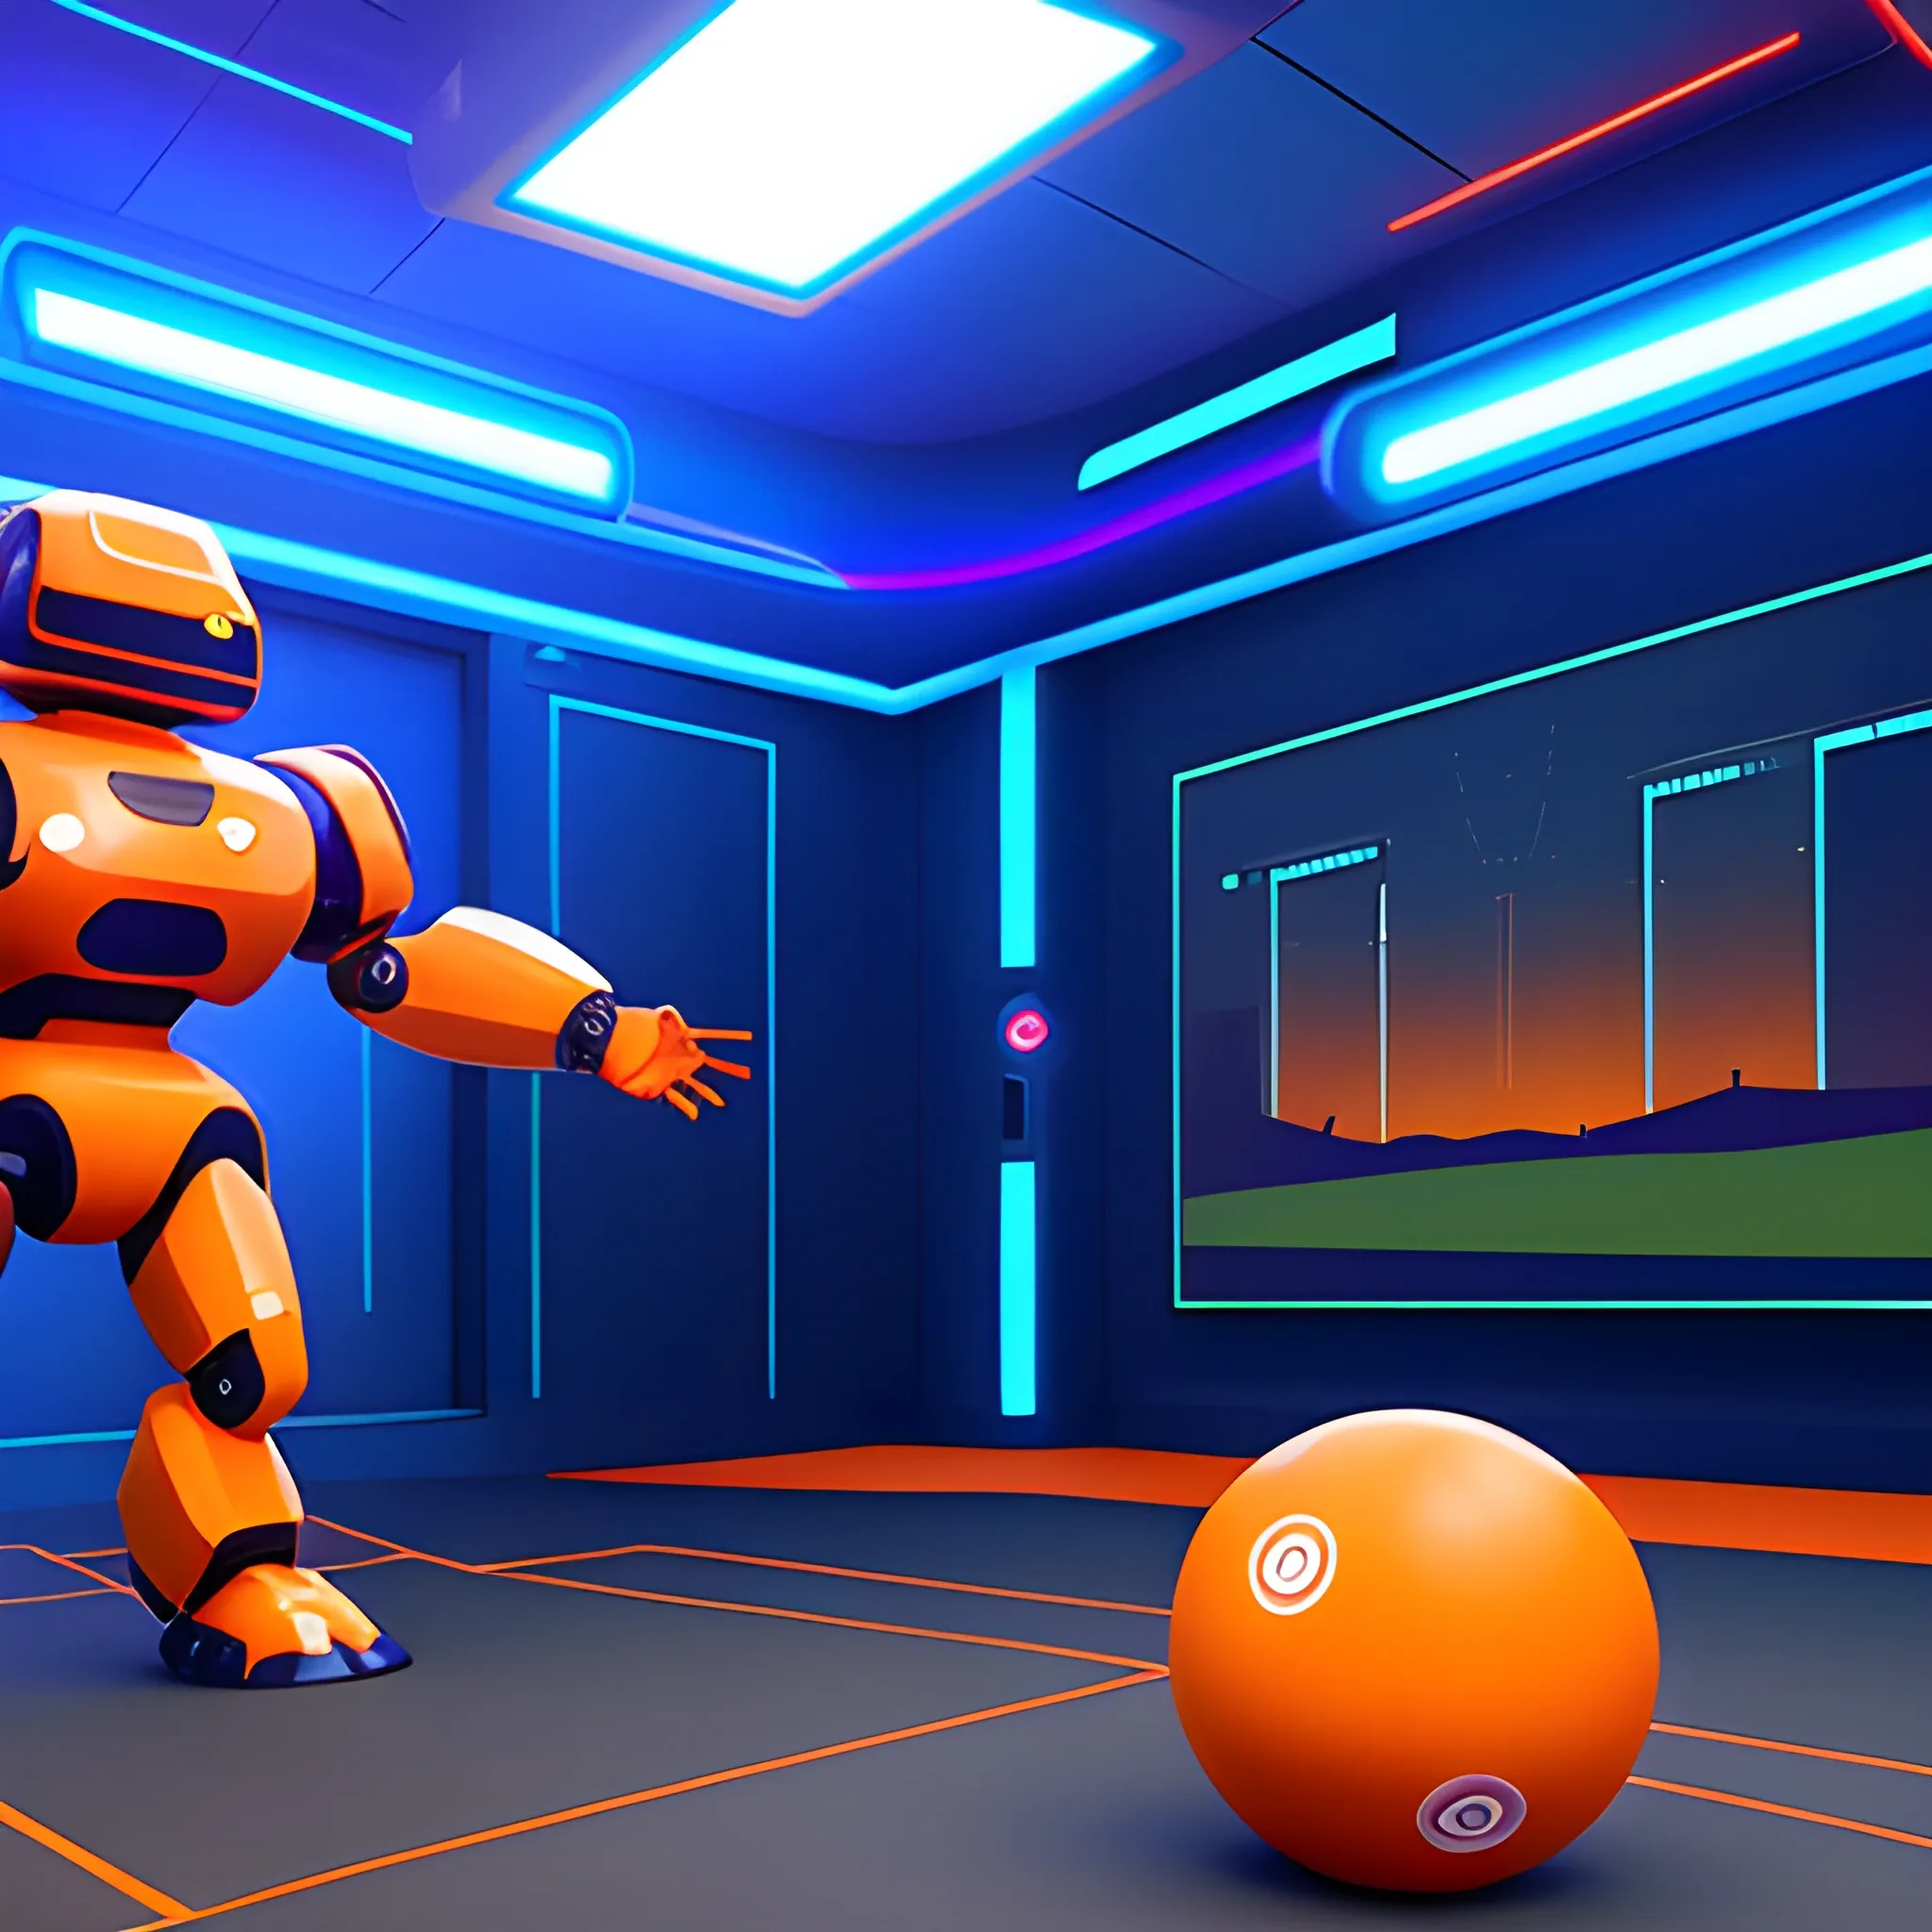 in a low poly virtual world, with orange spheres in the background, in the foreground a small welcoming robot, aligned to the right of the image, taking up only a third of the image, with blue monitor lighting., Cartoon